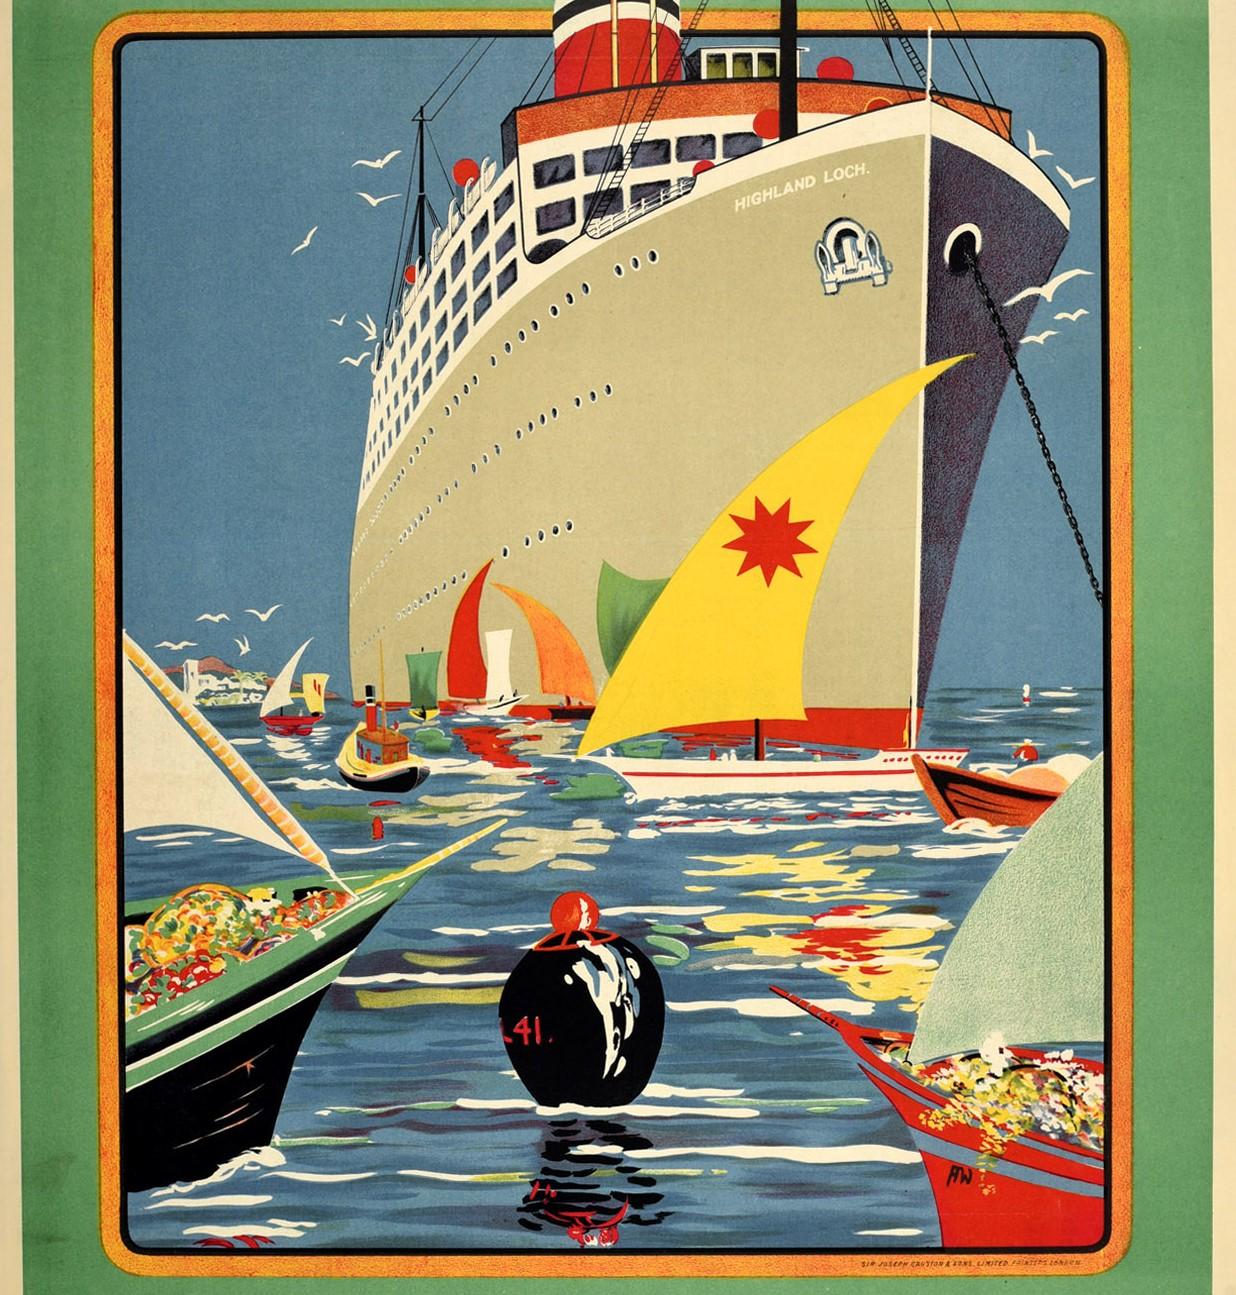 Original vintage cruise ship travel poster for Nelson Lines advertising regular fortnightly mail, passenger and freight service London and Boulogne to Spain Canary Islands Brazil Uruguay and Argentina maximum comfort with low fares. Colourful